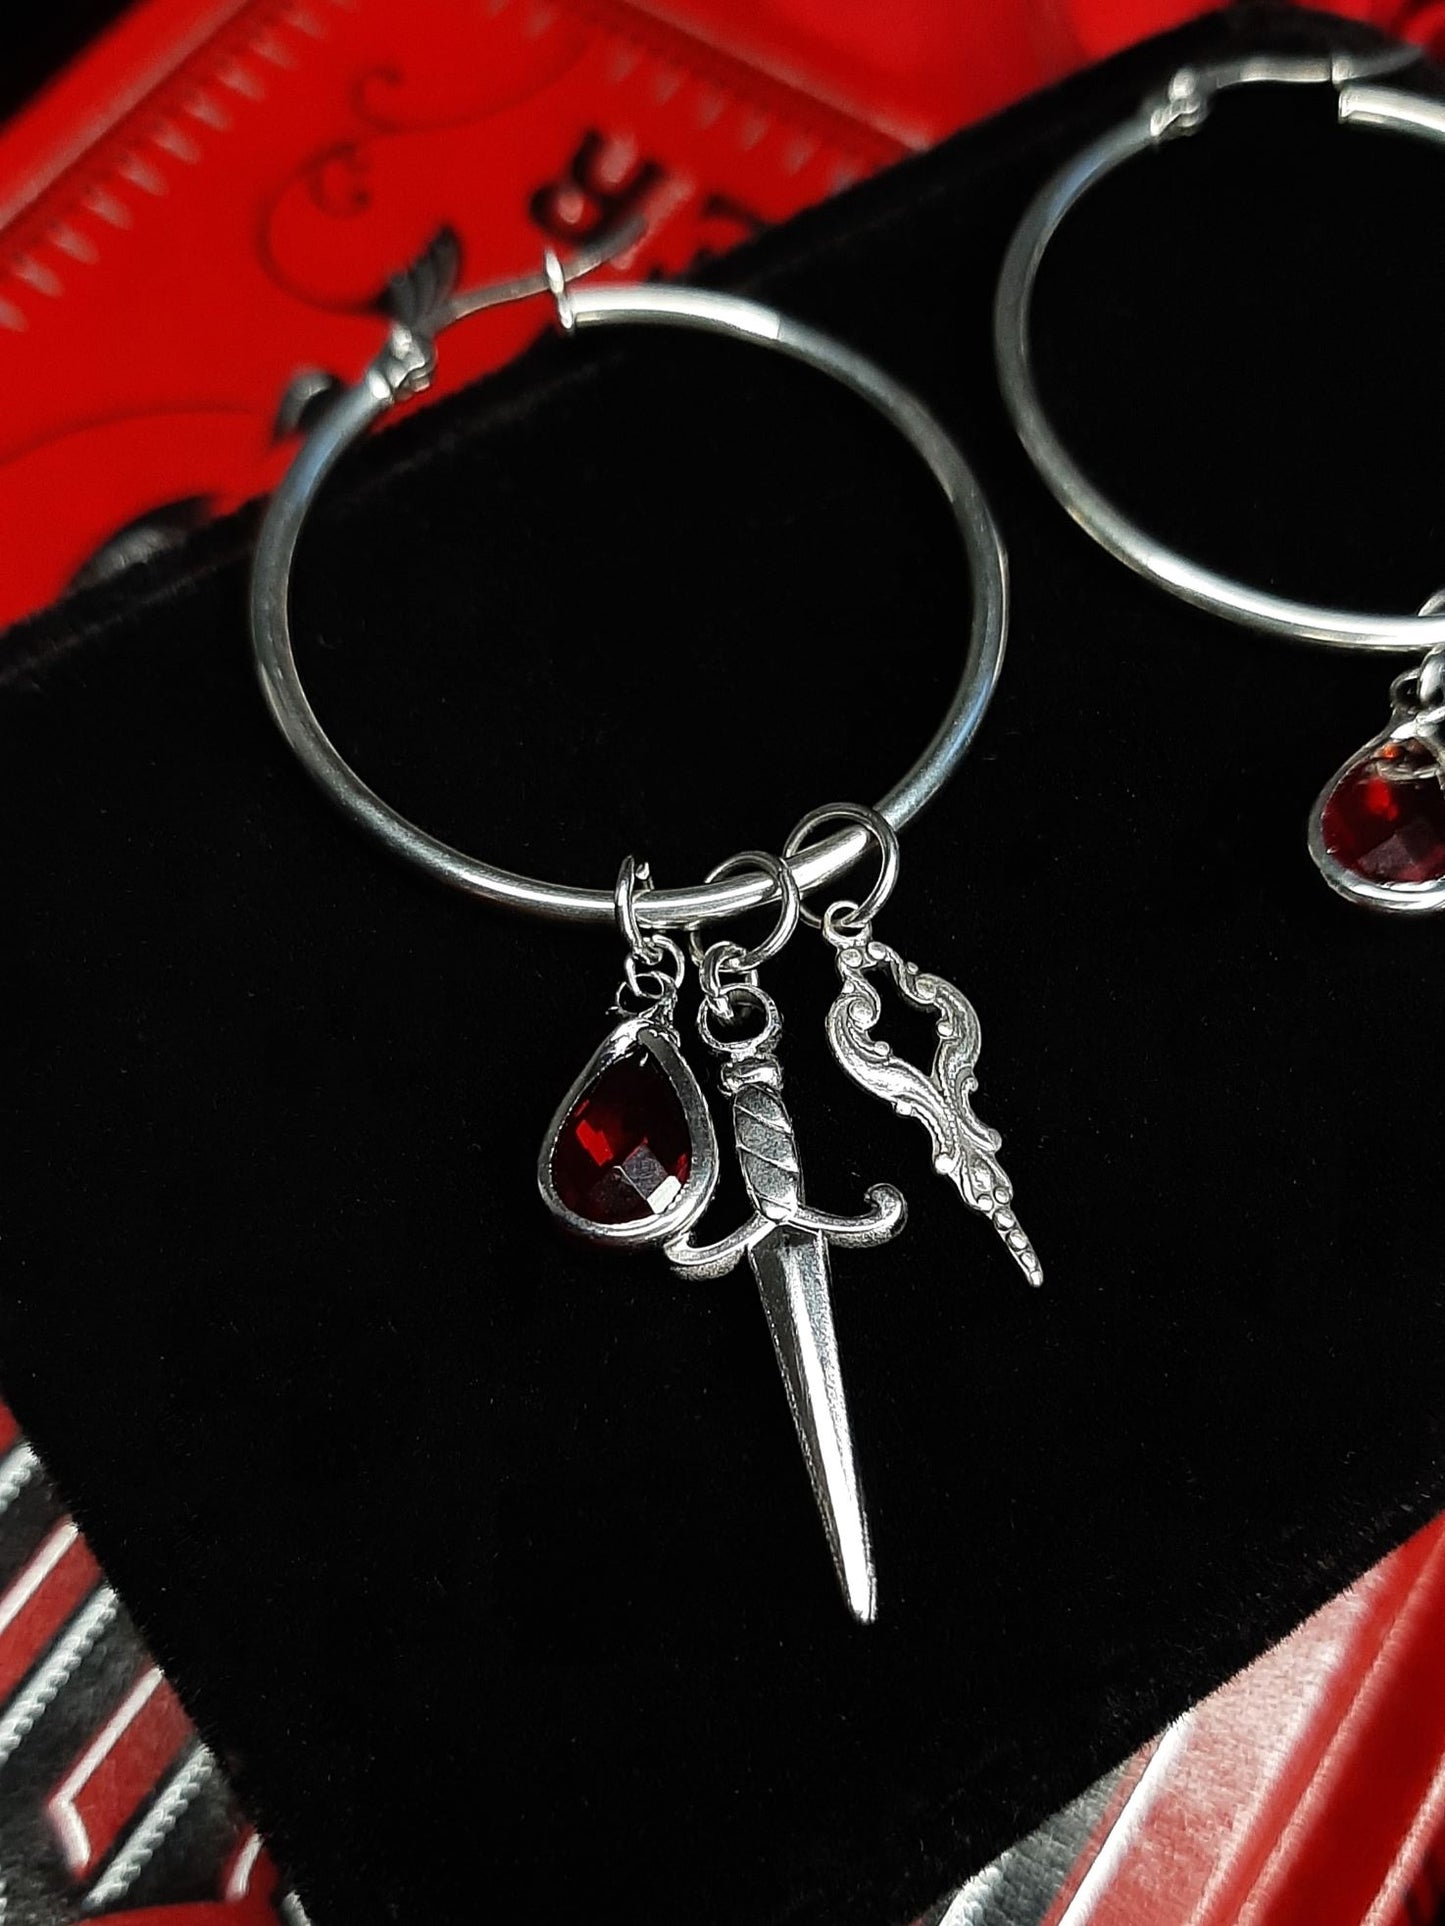 𝕰𝖒𝖕𝖗𝖊𝖘𝖘 charm hoops - Red 𝖔𝖓𝖊 𝖑𝖊𝖋𝖙 !